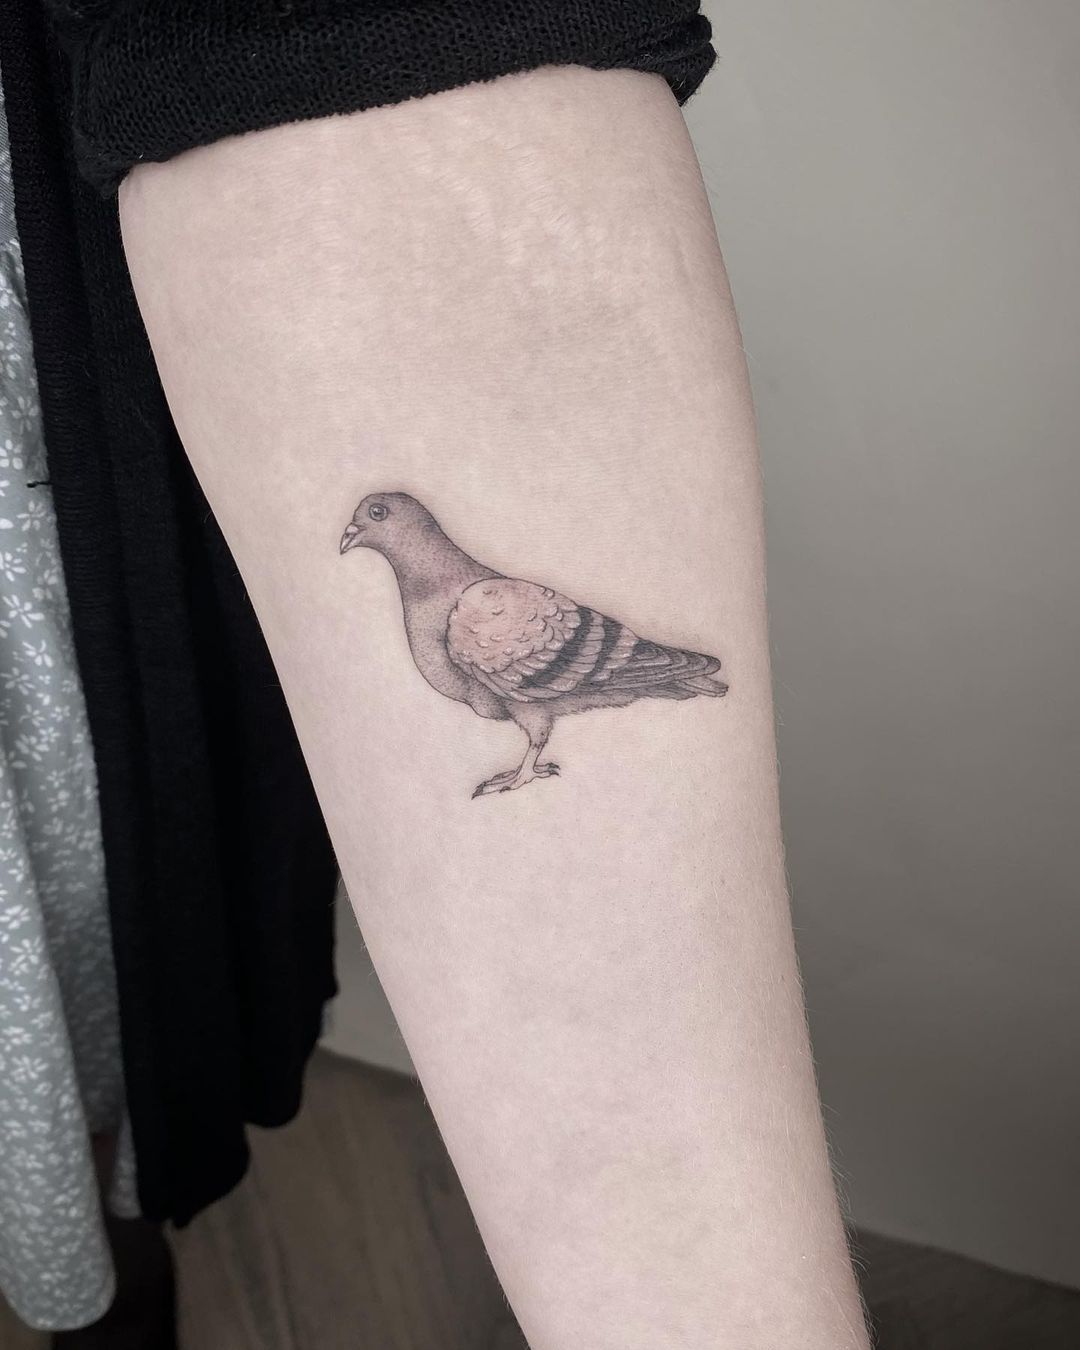 Who to Tattoo? Thoughts on Body Art, Challenging Misperceptions, and Flying  Away – Our Hen House